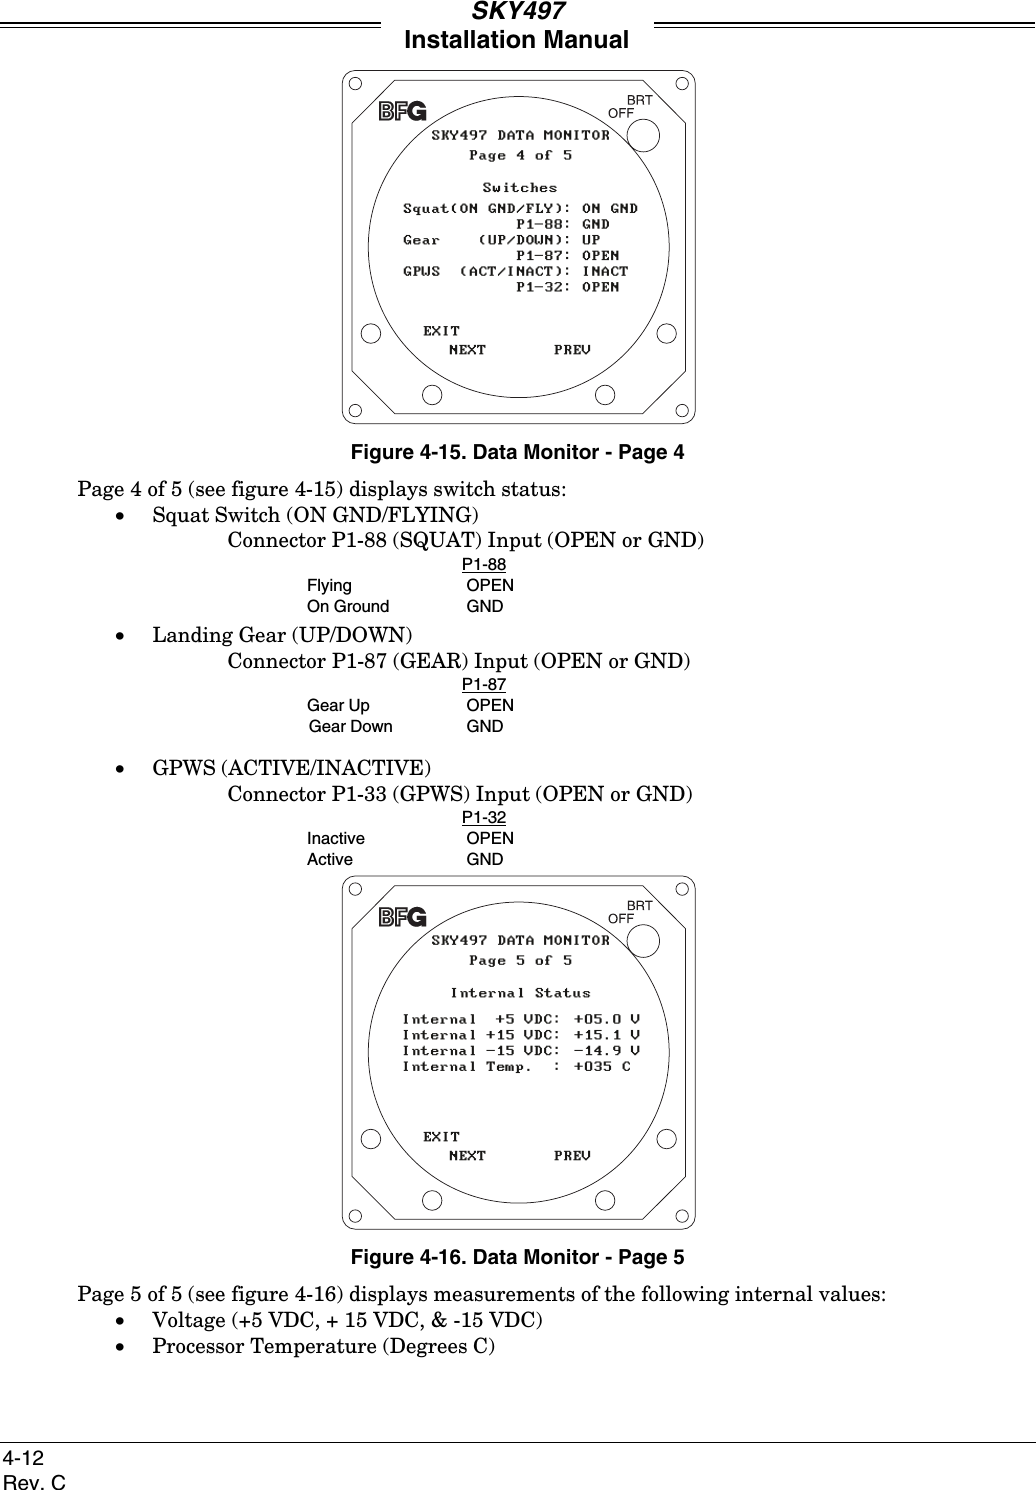 SKY497Installation Manual4-12Rev. CFigure 4-15. Data Monitor - Page 4Page 4 of 5 (see figure 4-15) displays switch status:• Squat Switch (ON GND/FLYING)Connector P1-88 (SQUAT) Input (OPEN or GND)P1-88Flying OPENOn Ground GND• Landing Gear (UP/DOWN)Connector P1-87 (GEAR) Input (OPEN or GND)P1-87Gear Up OPENGear Down GND• GPWS (ACTIVE/INACTIVE)Connector P1-33 (GPWS) Input (OPEN or GND)P1-32Inactive OPENActive GNDFigure 4-16. Data Monitor - Page 5Page 5 of 5 (see figure 4-16) displays measurements of the following internal values:• Voltage (+5 VDC, + 15 VDC, &amp; -15 VDC)• Processor Temperature (Degrees C)